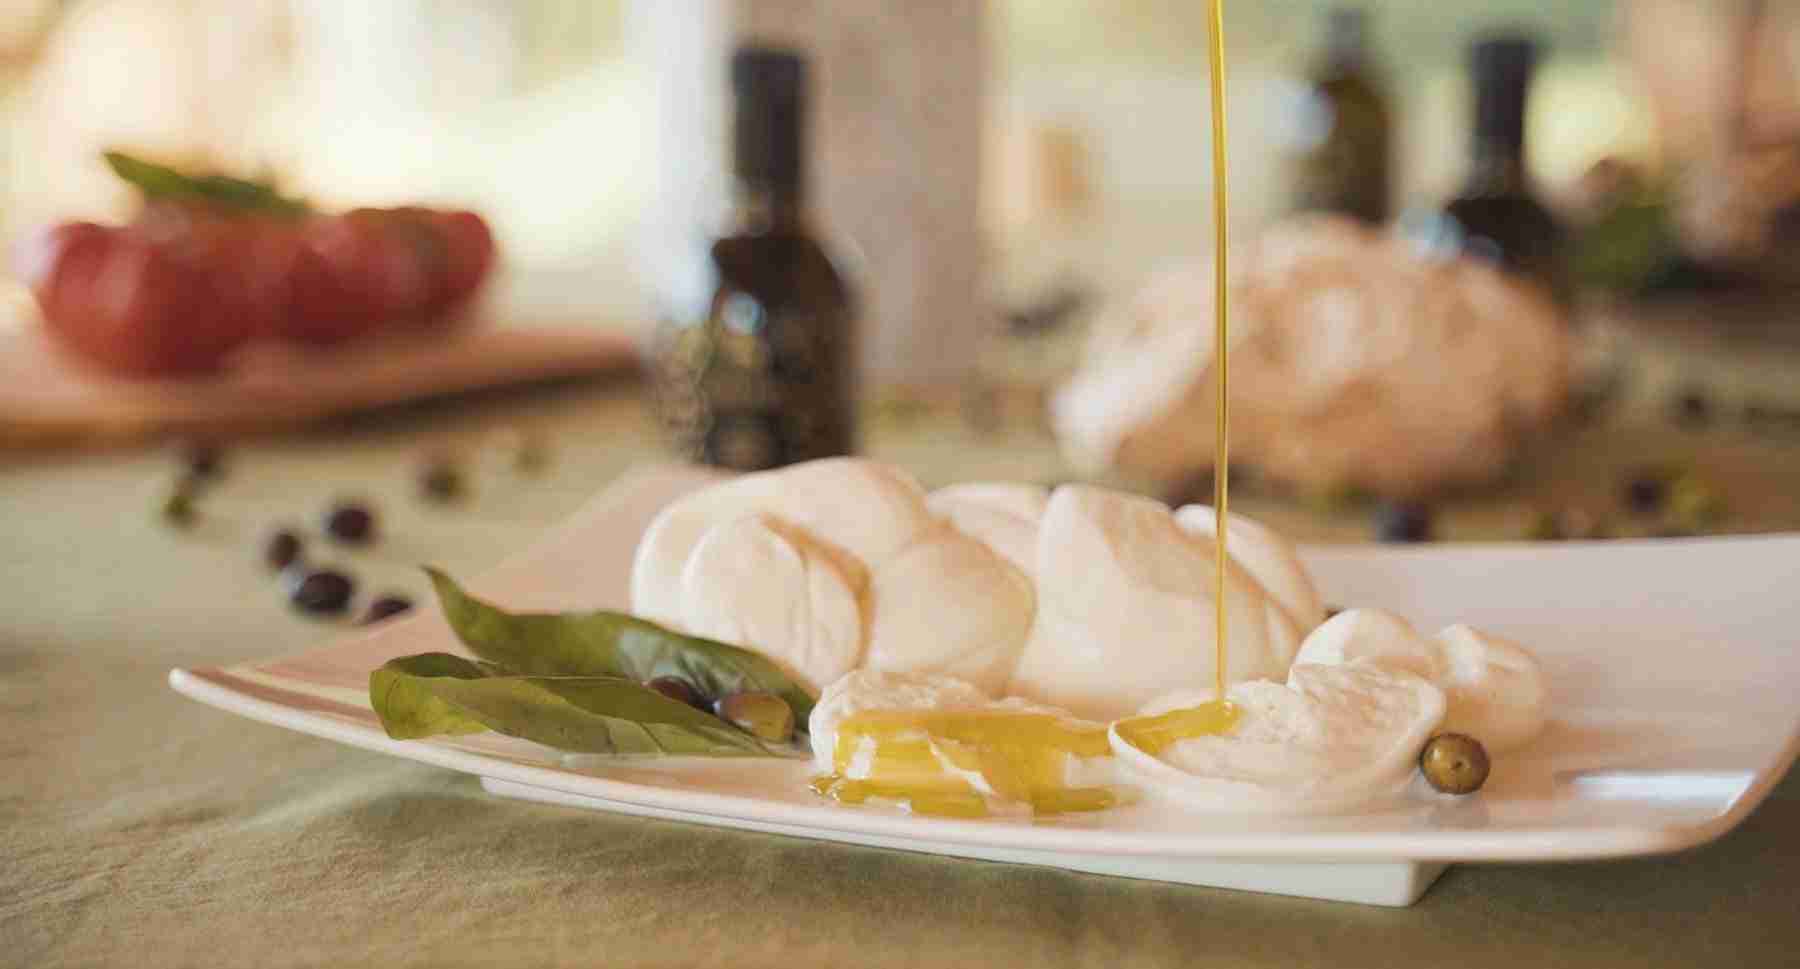 Buying Guide of Extra Virgin Olive Oil